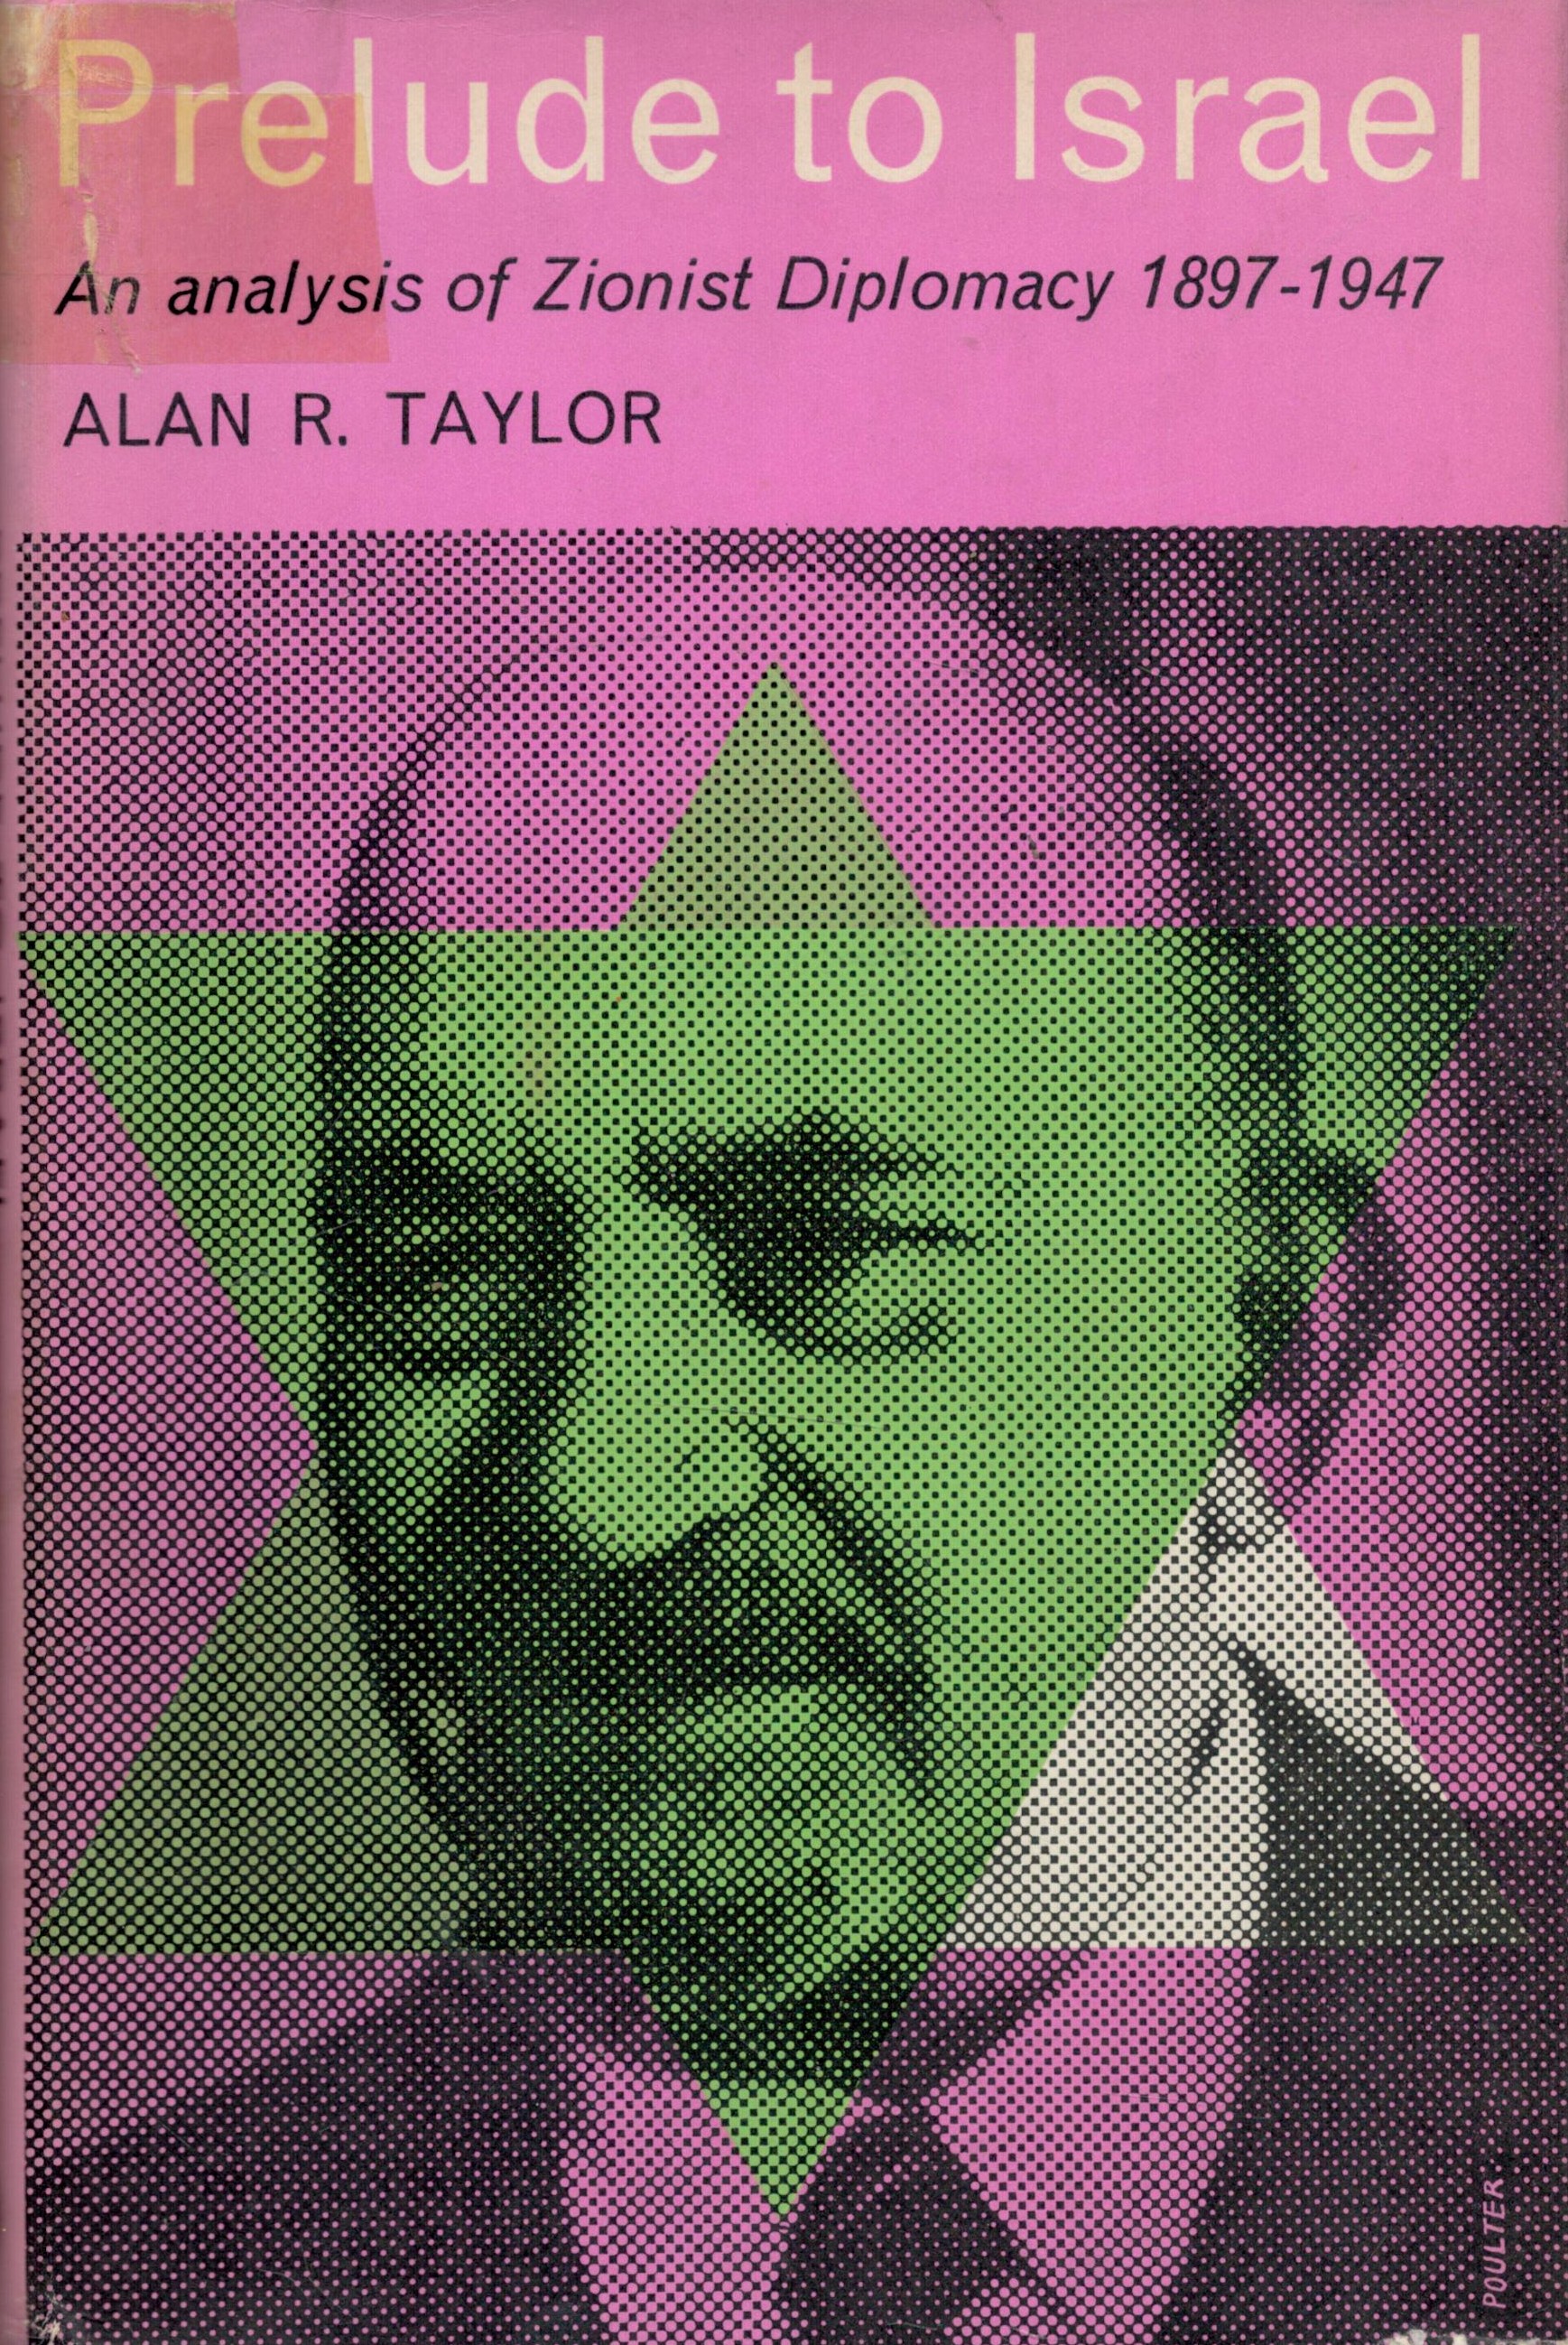 Prelude To Israel An Analysis of Zionist Diplomacy 1897 1947 by Alan R Taylor 1961 First Edition